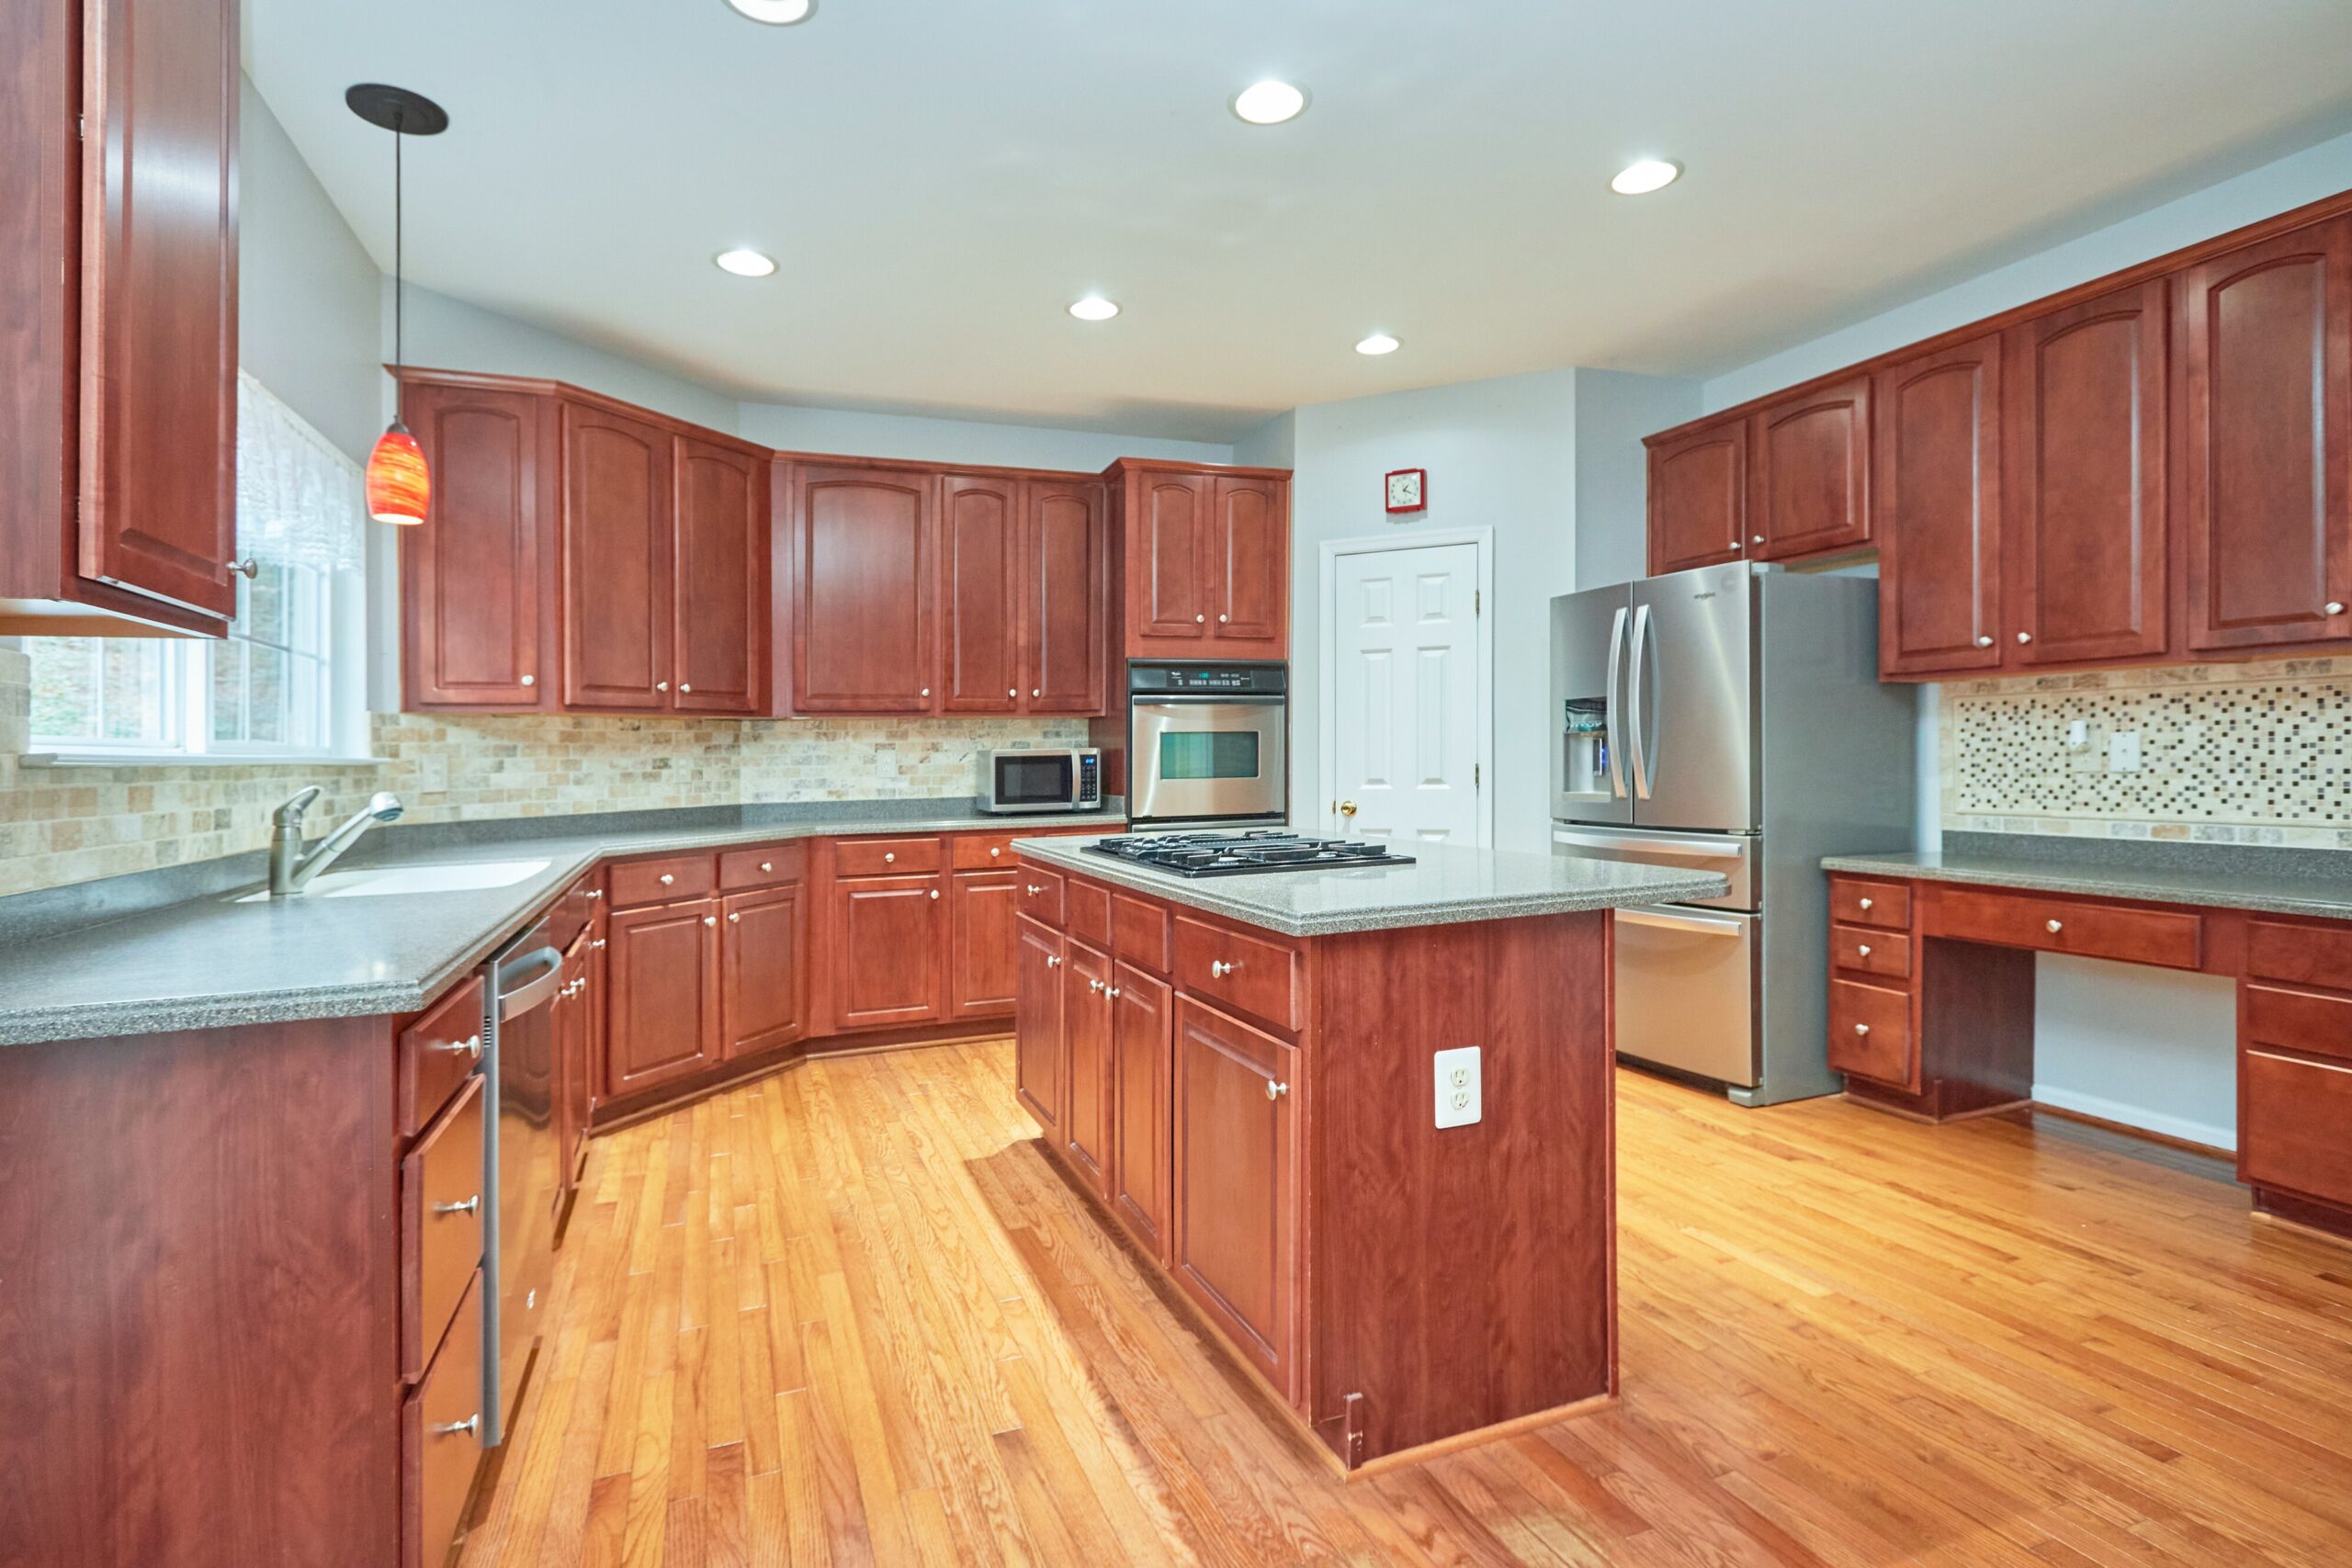 Professional interior photo of 80 Brentsmill Drive in Stafford, Virginia - showing the kitchen with hardwood floors, cherry style cabinets and granite counters